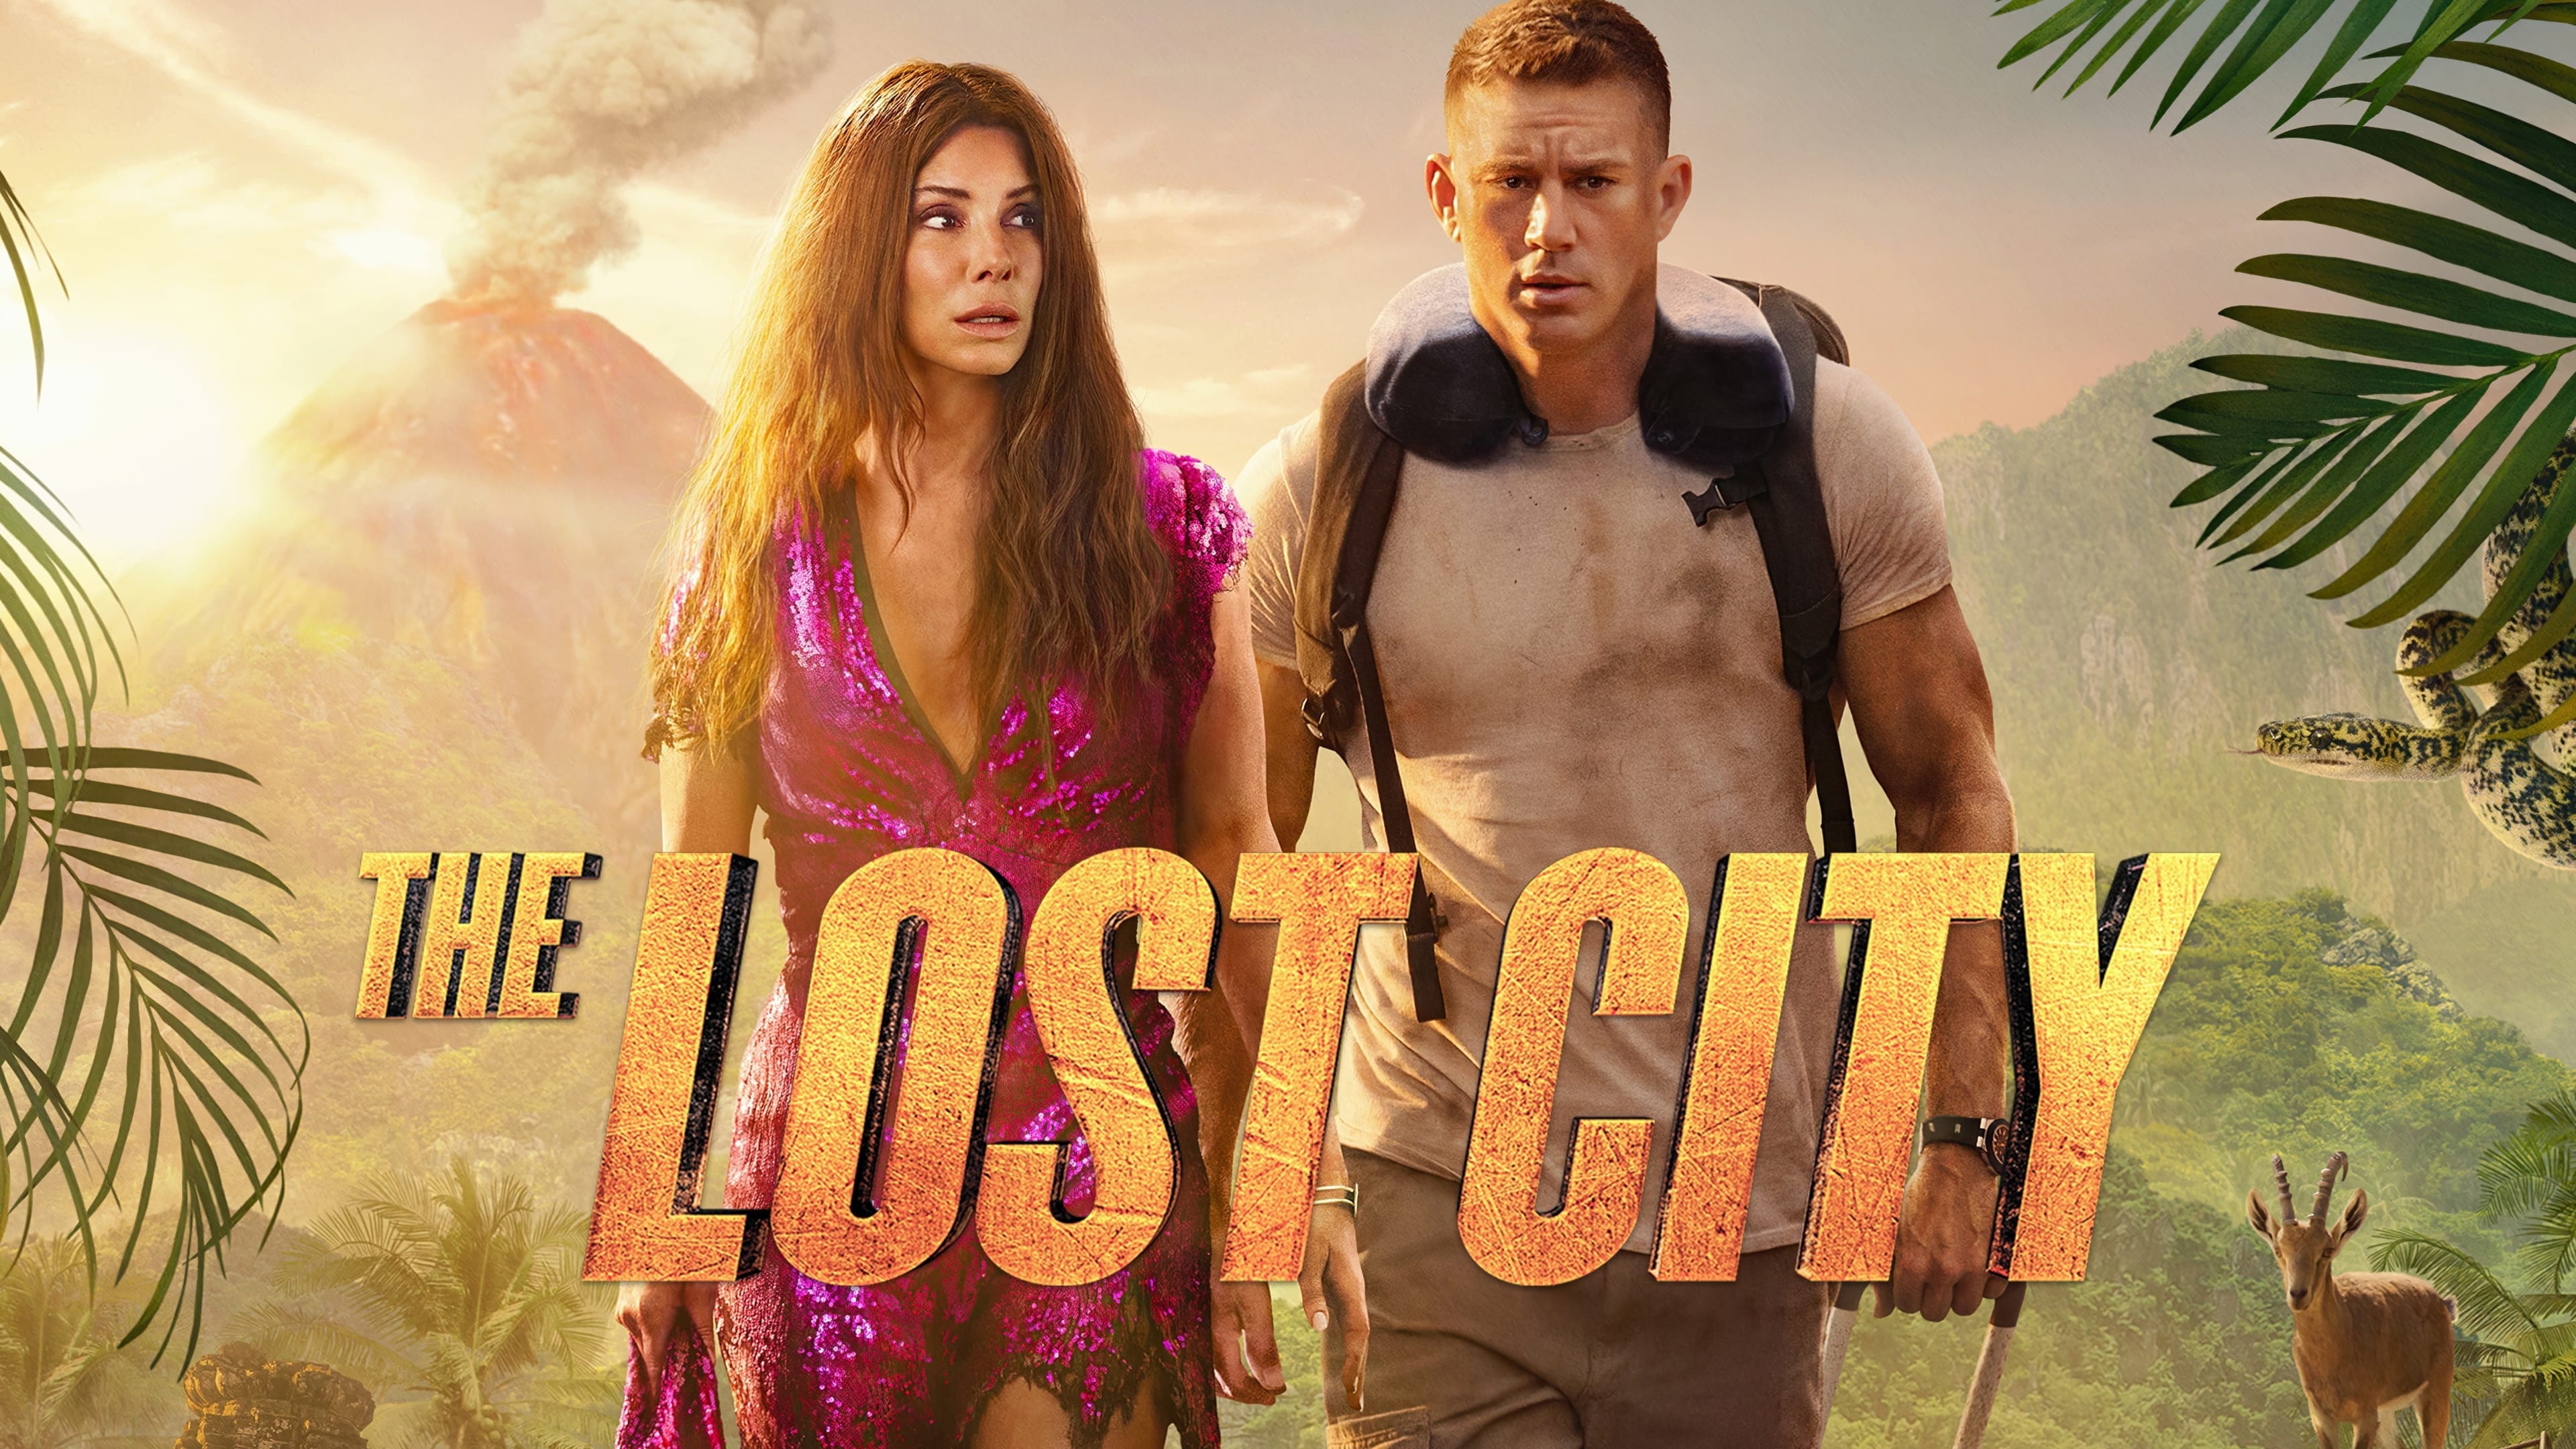 The Lost City (2022): The film stars Sandra Bullock and Channing Tatum as a romance novelist and her cover model. 3840x2160 4K Background.